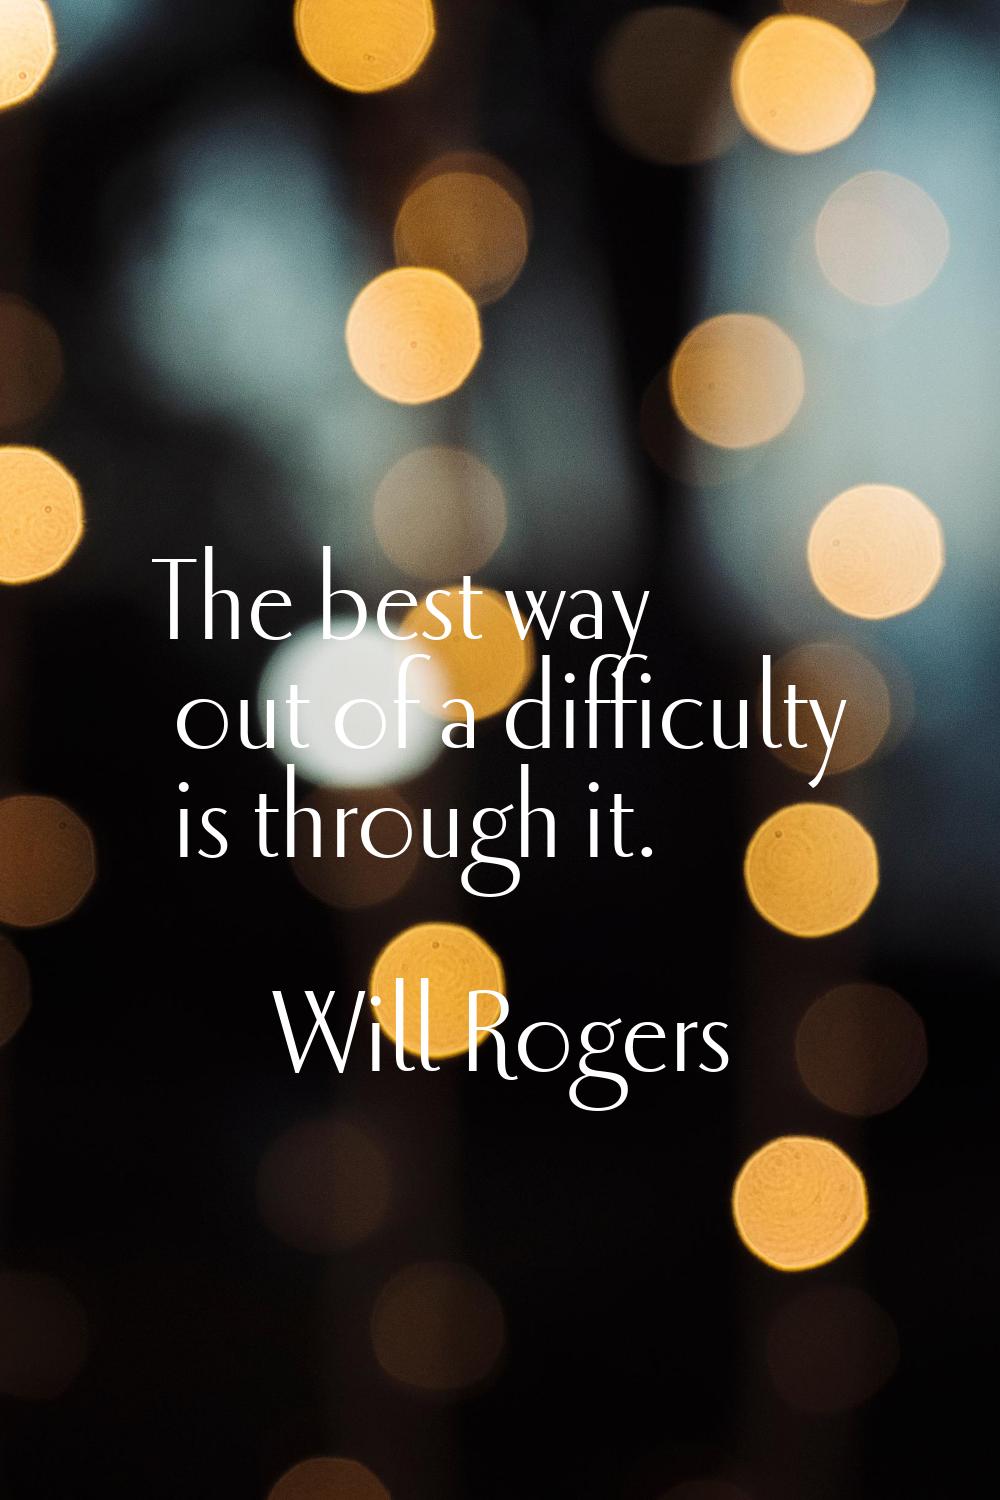 The best way out of a difficulty is through it.